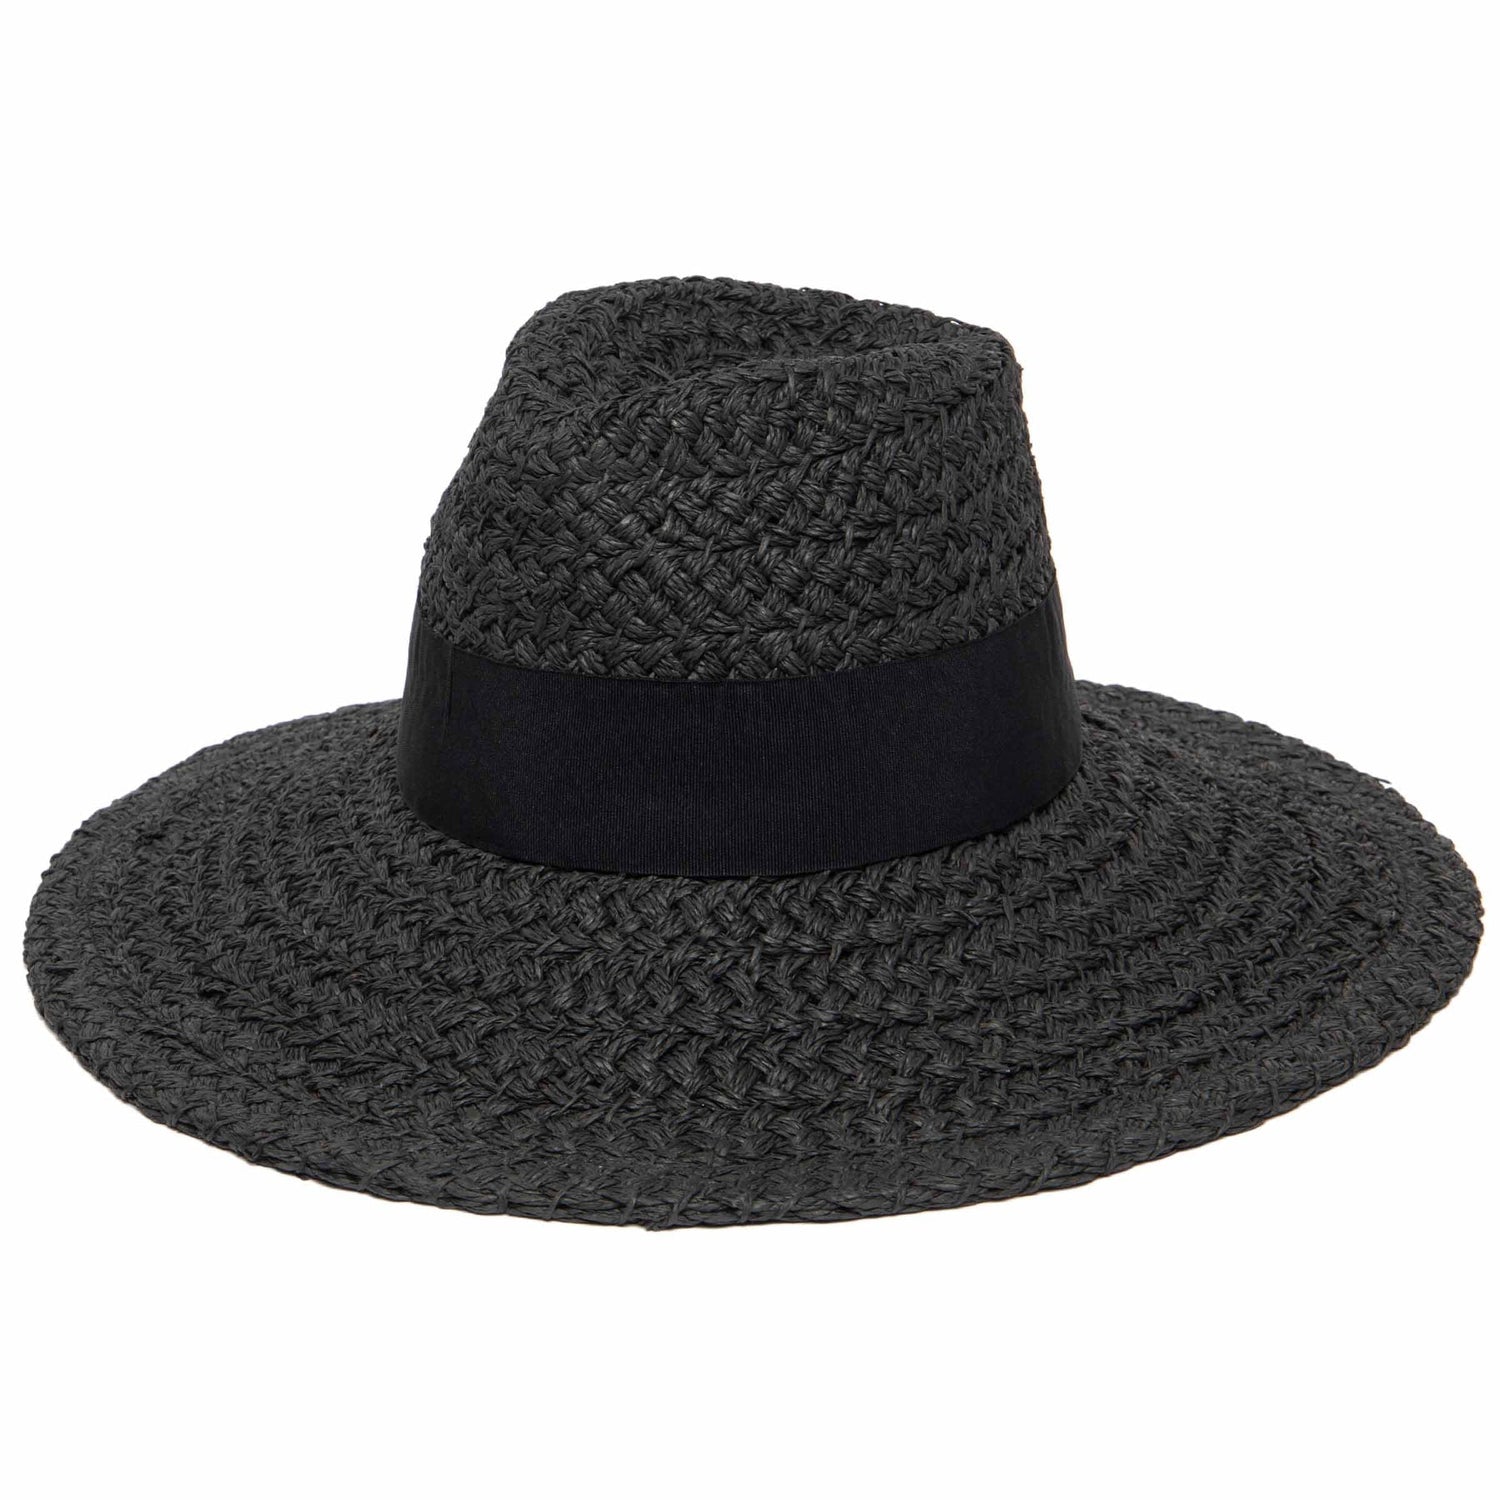 Wide Brim Fedora With Grosgrain - The Riviera Towel Company